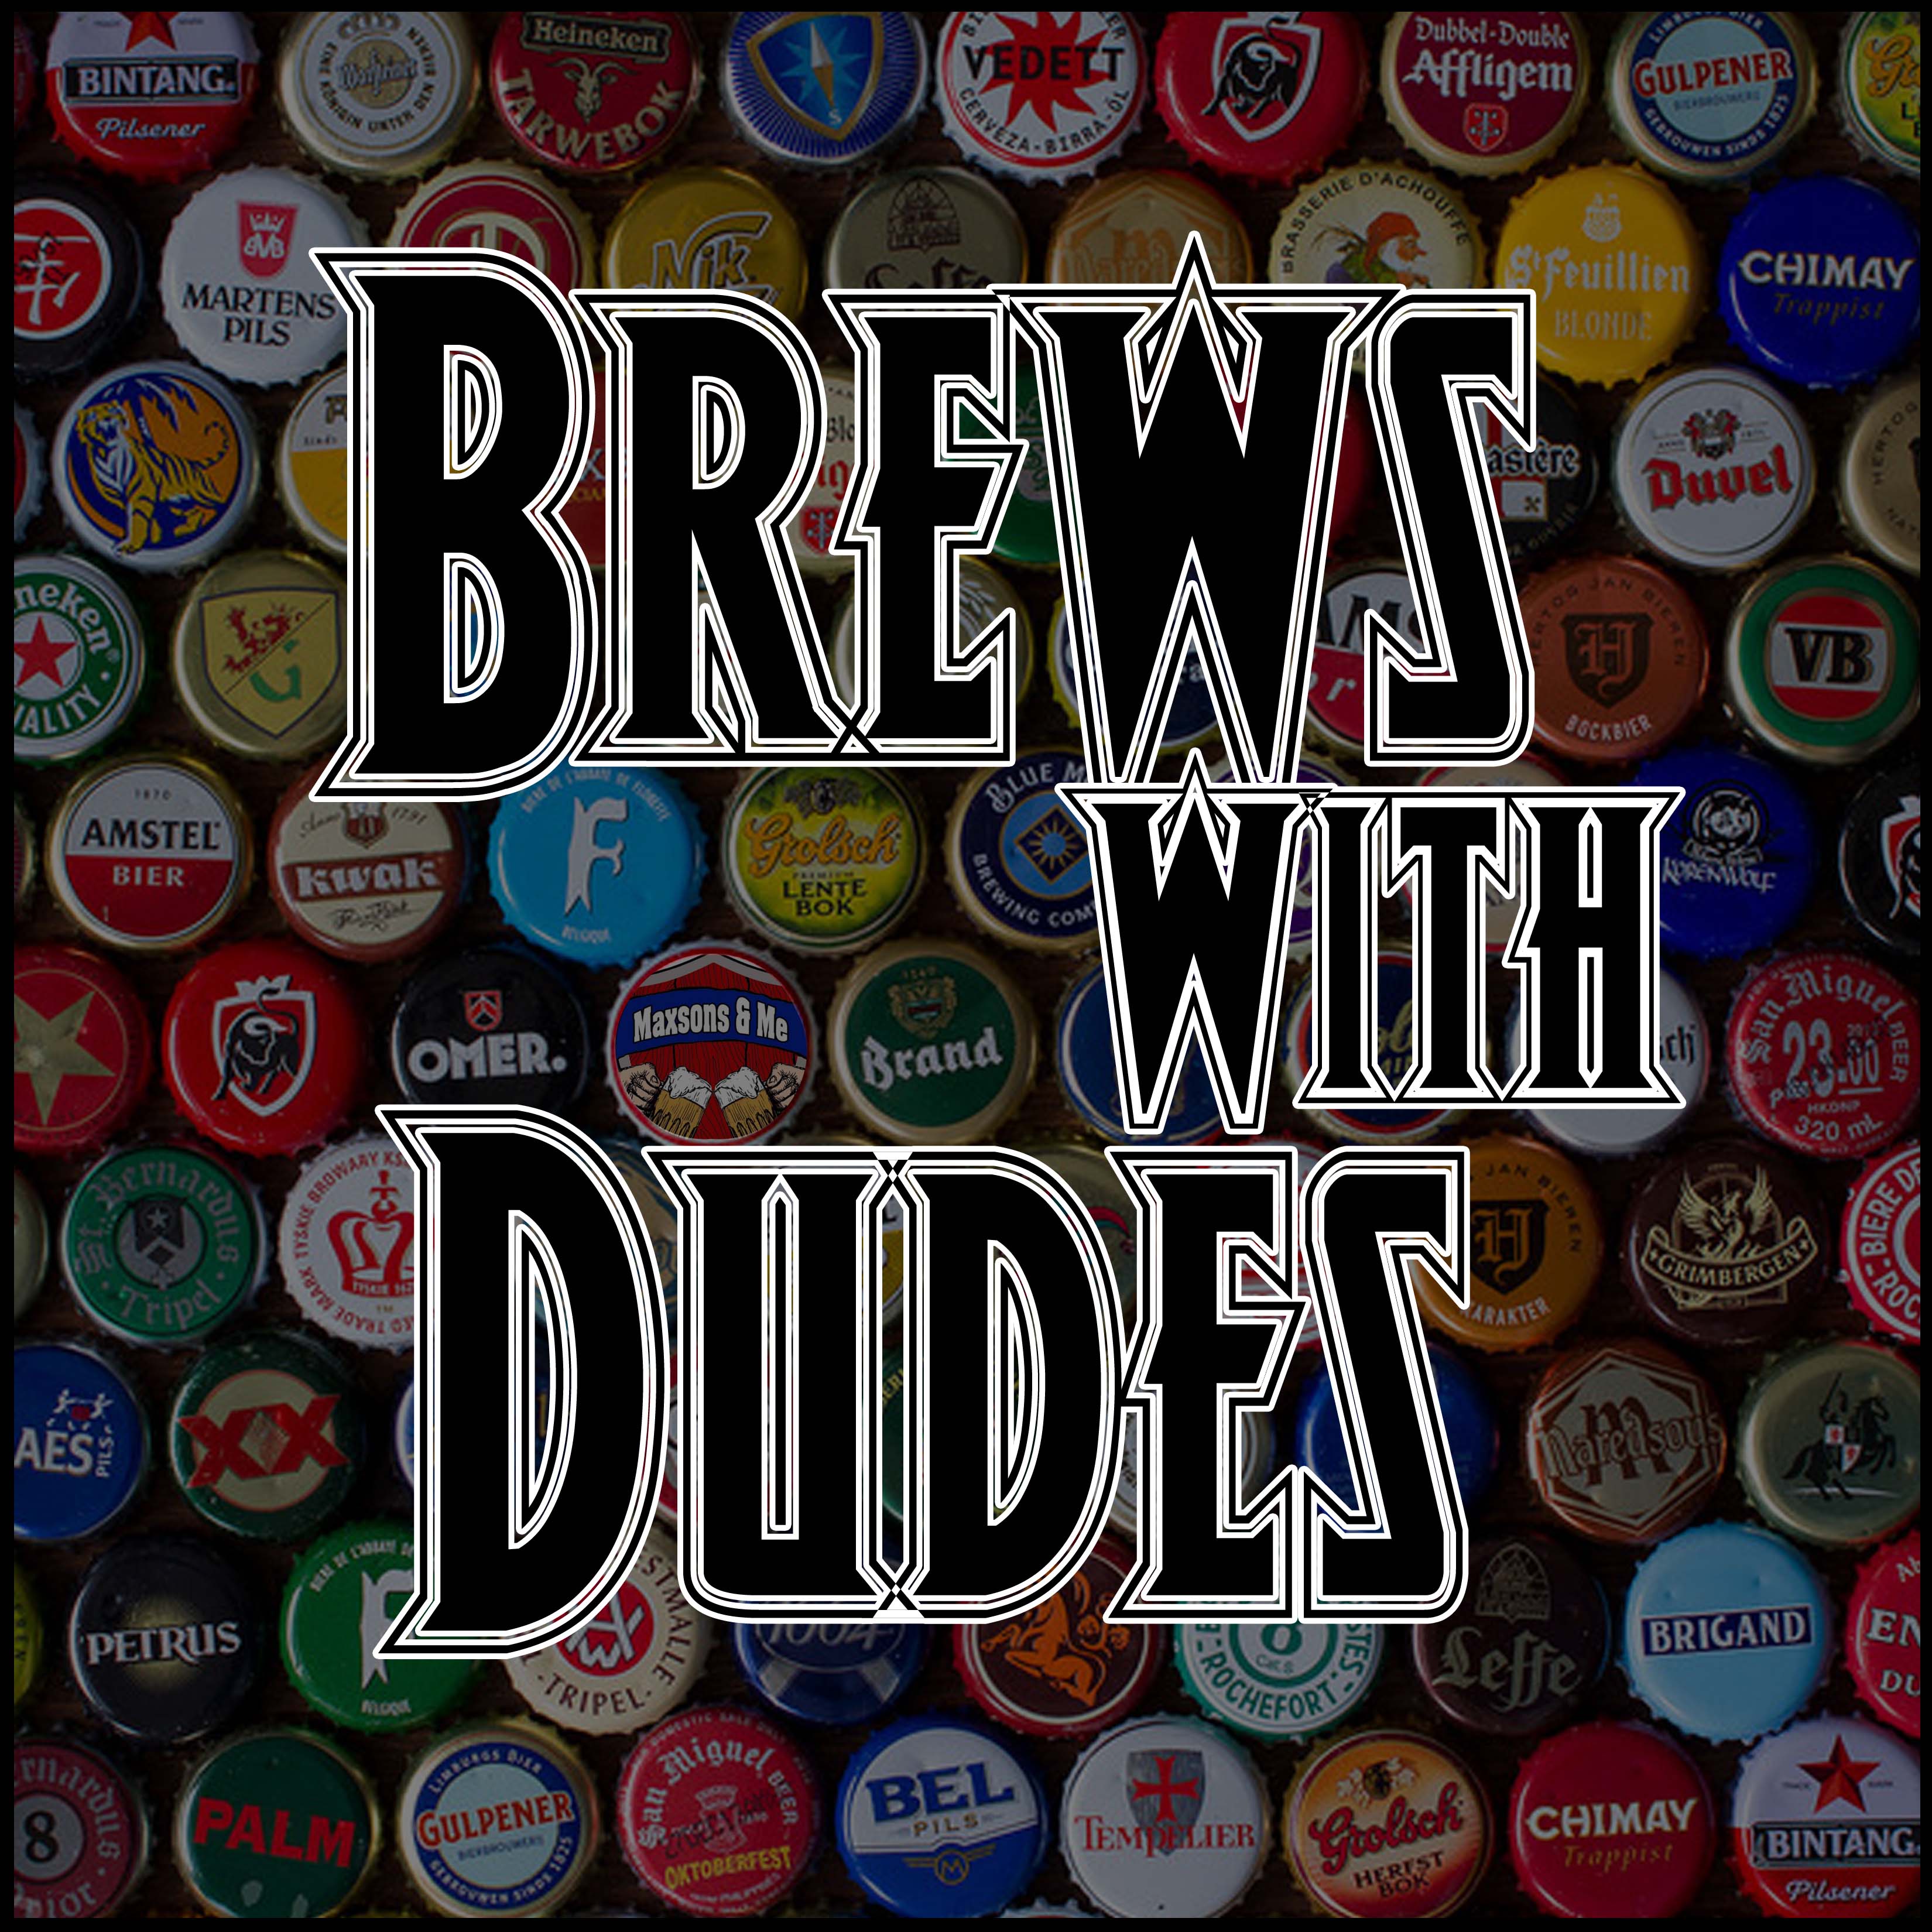 Brews With Dudes 008 - The Lost Episode